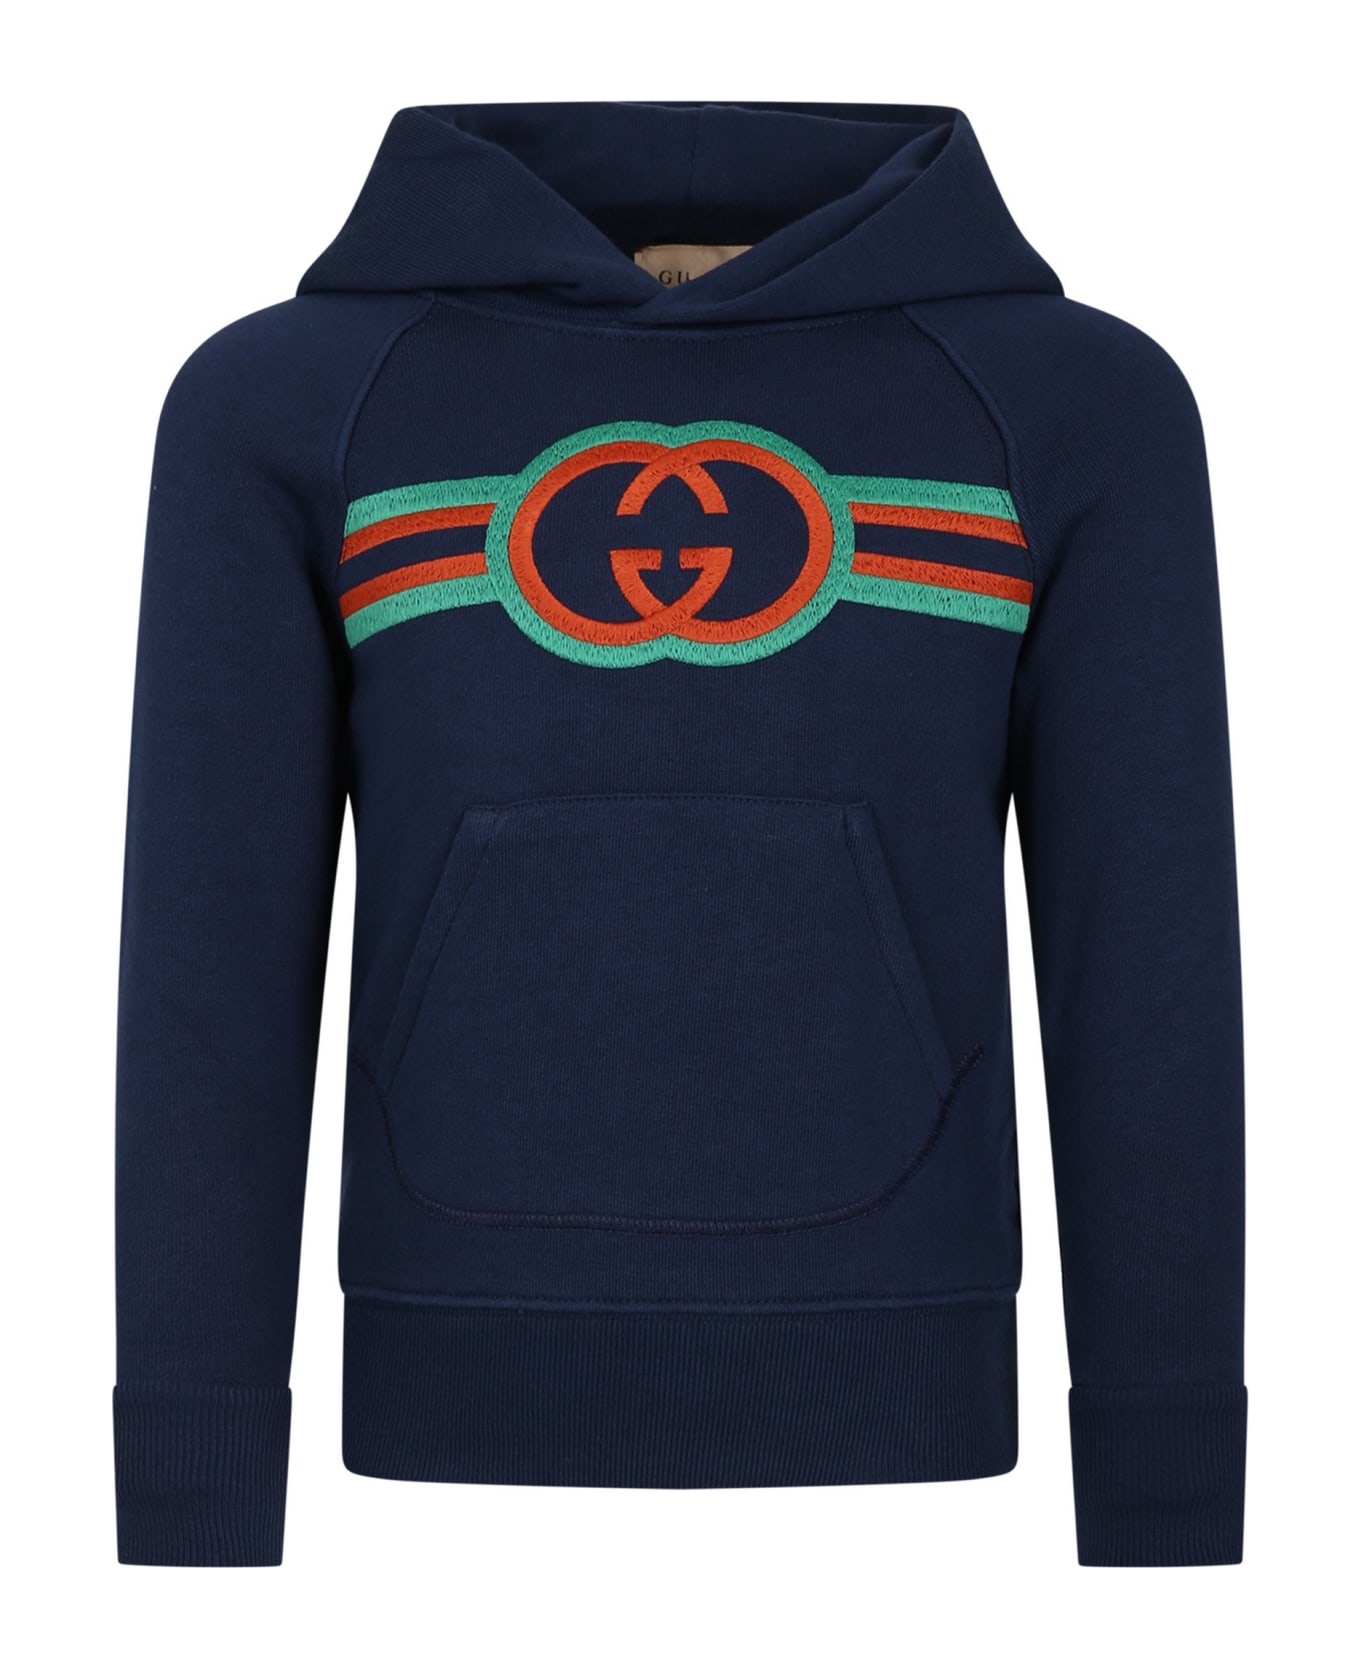 Gucci Blue Sweatshirt For Boy With Double G - Blue